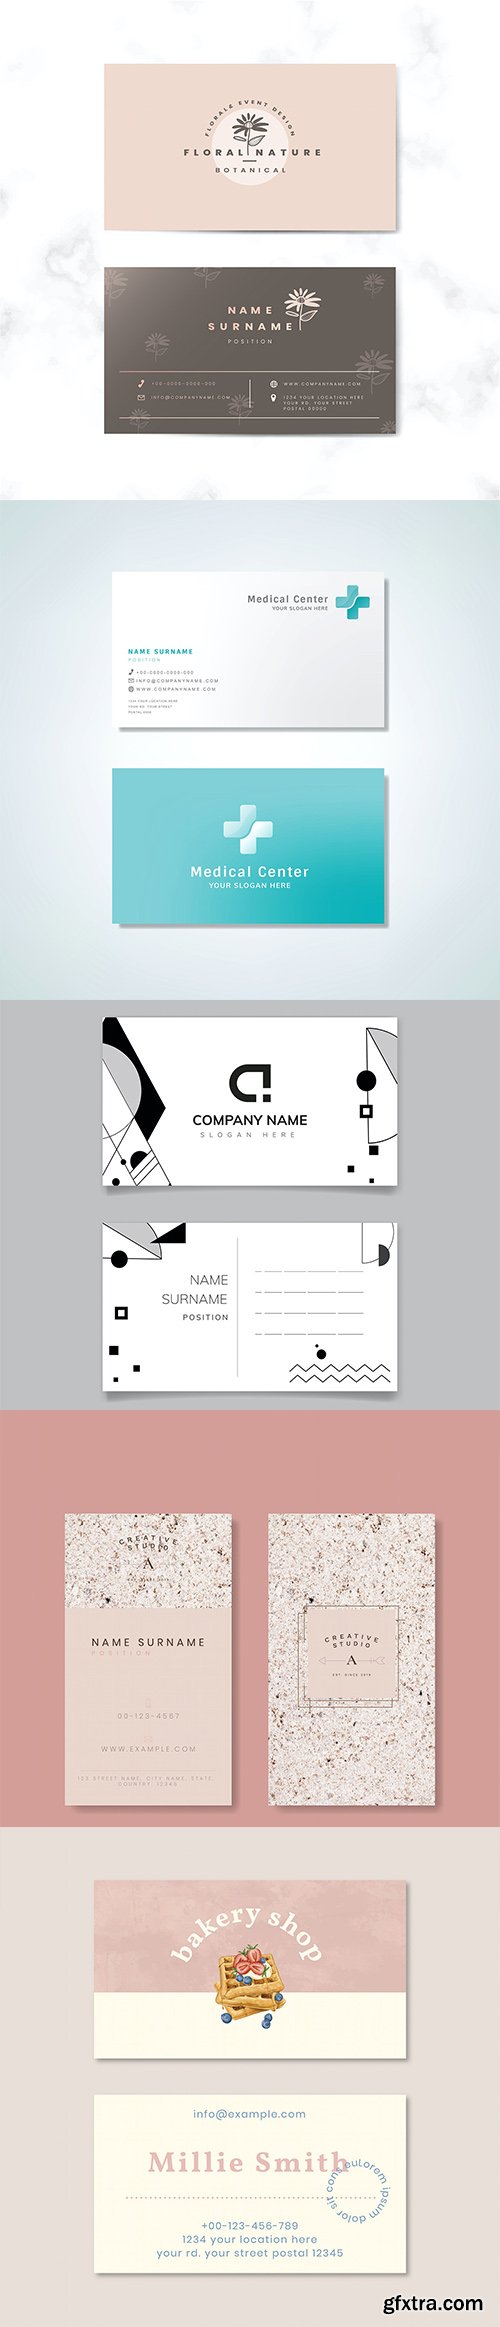 Set of business card template vol4